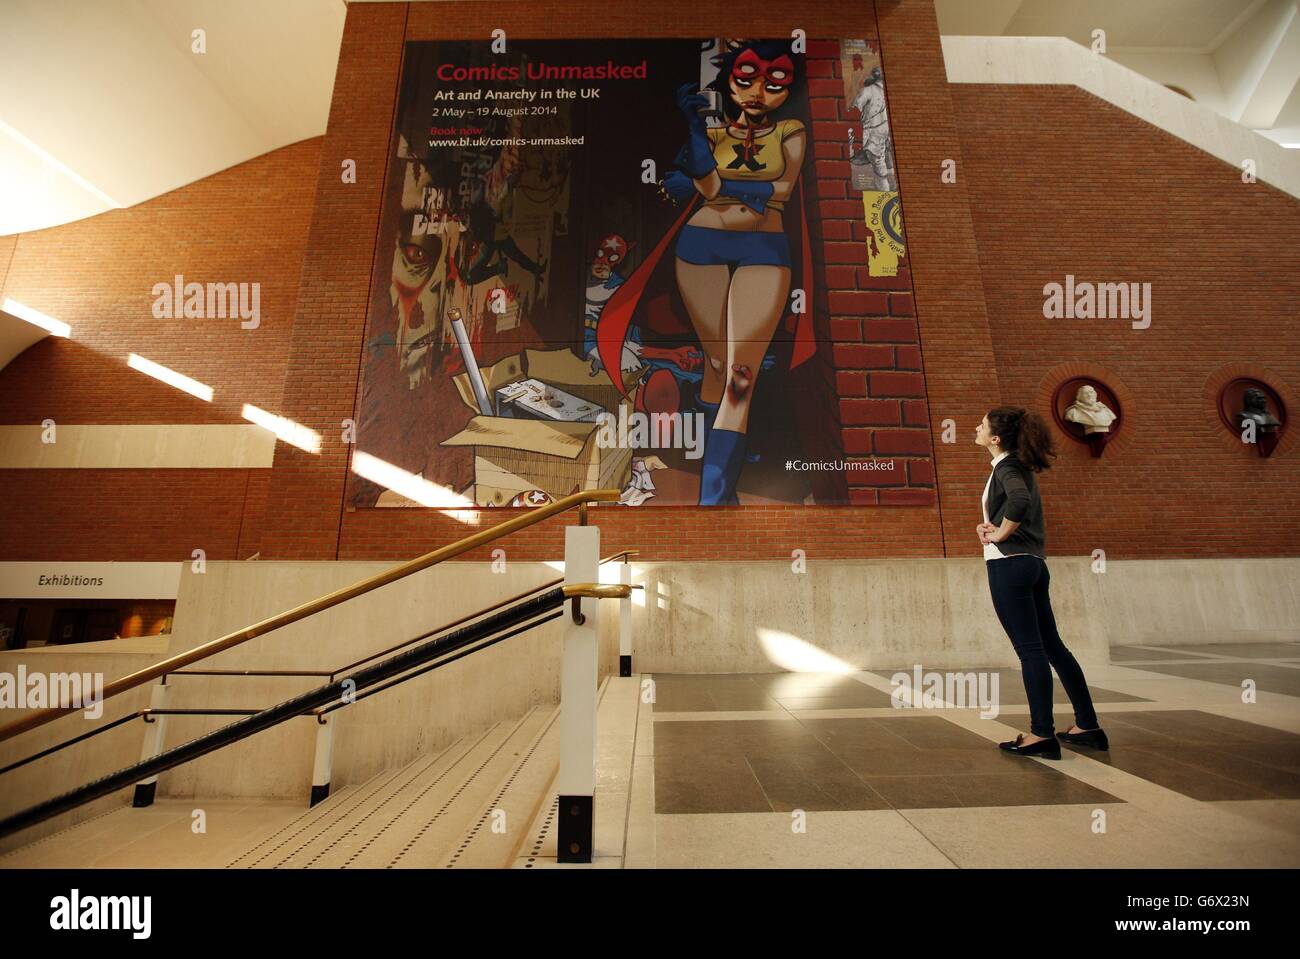 A British Library staff member walks past the tapestry style poster of artwork by Gorillaz co-creator Jamie Hewlett, that was commissioned for the upcoming exhibition 'The Comics Unmasked: Art and Anarchy in the UK' at The British Library, central London. Stock Photo